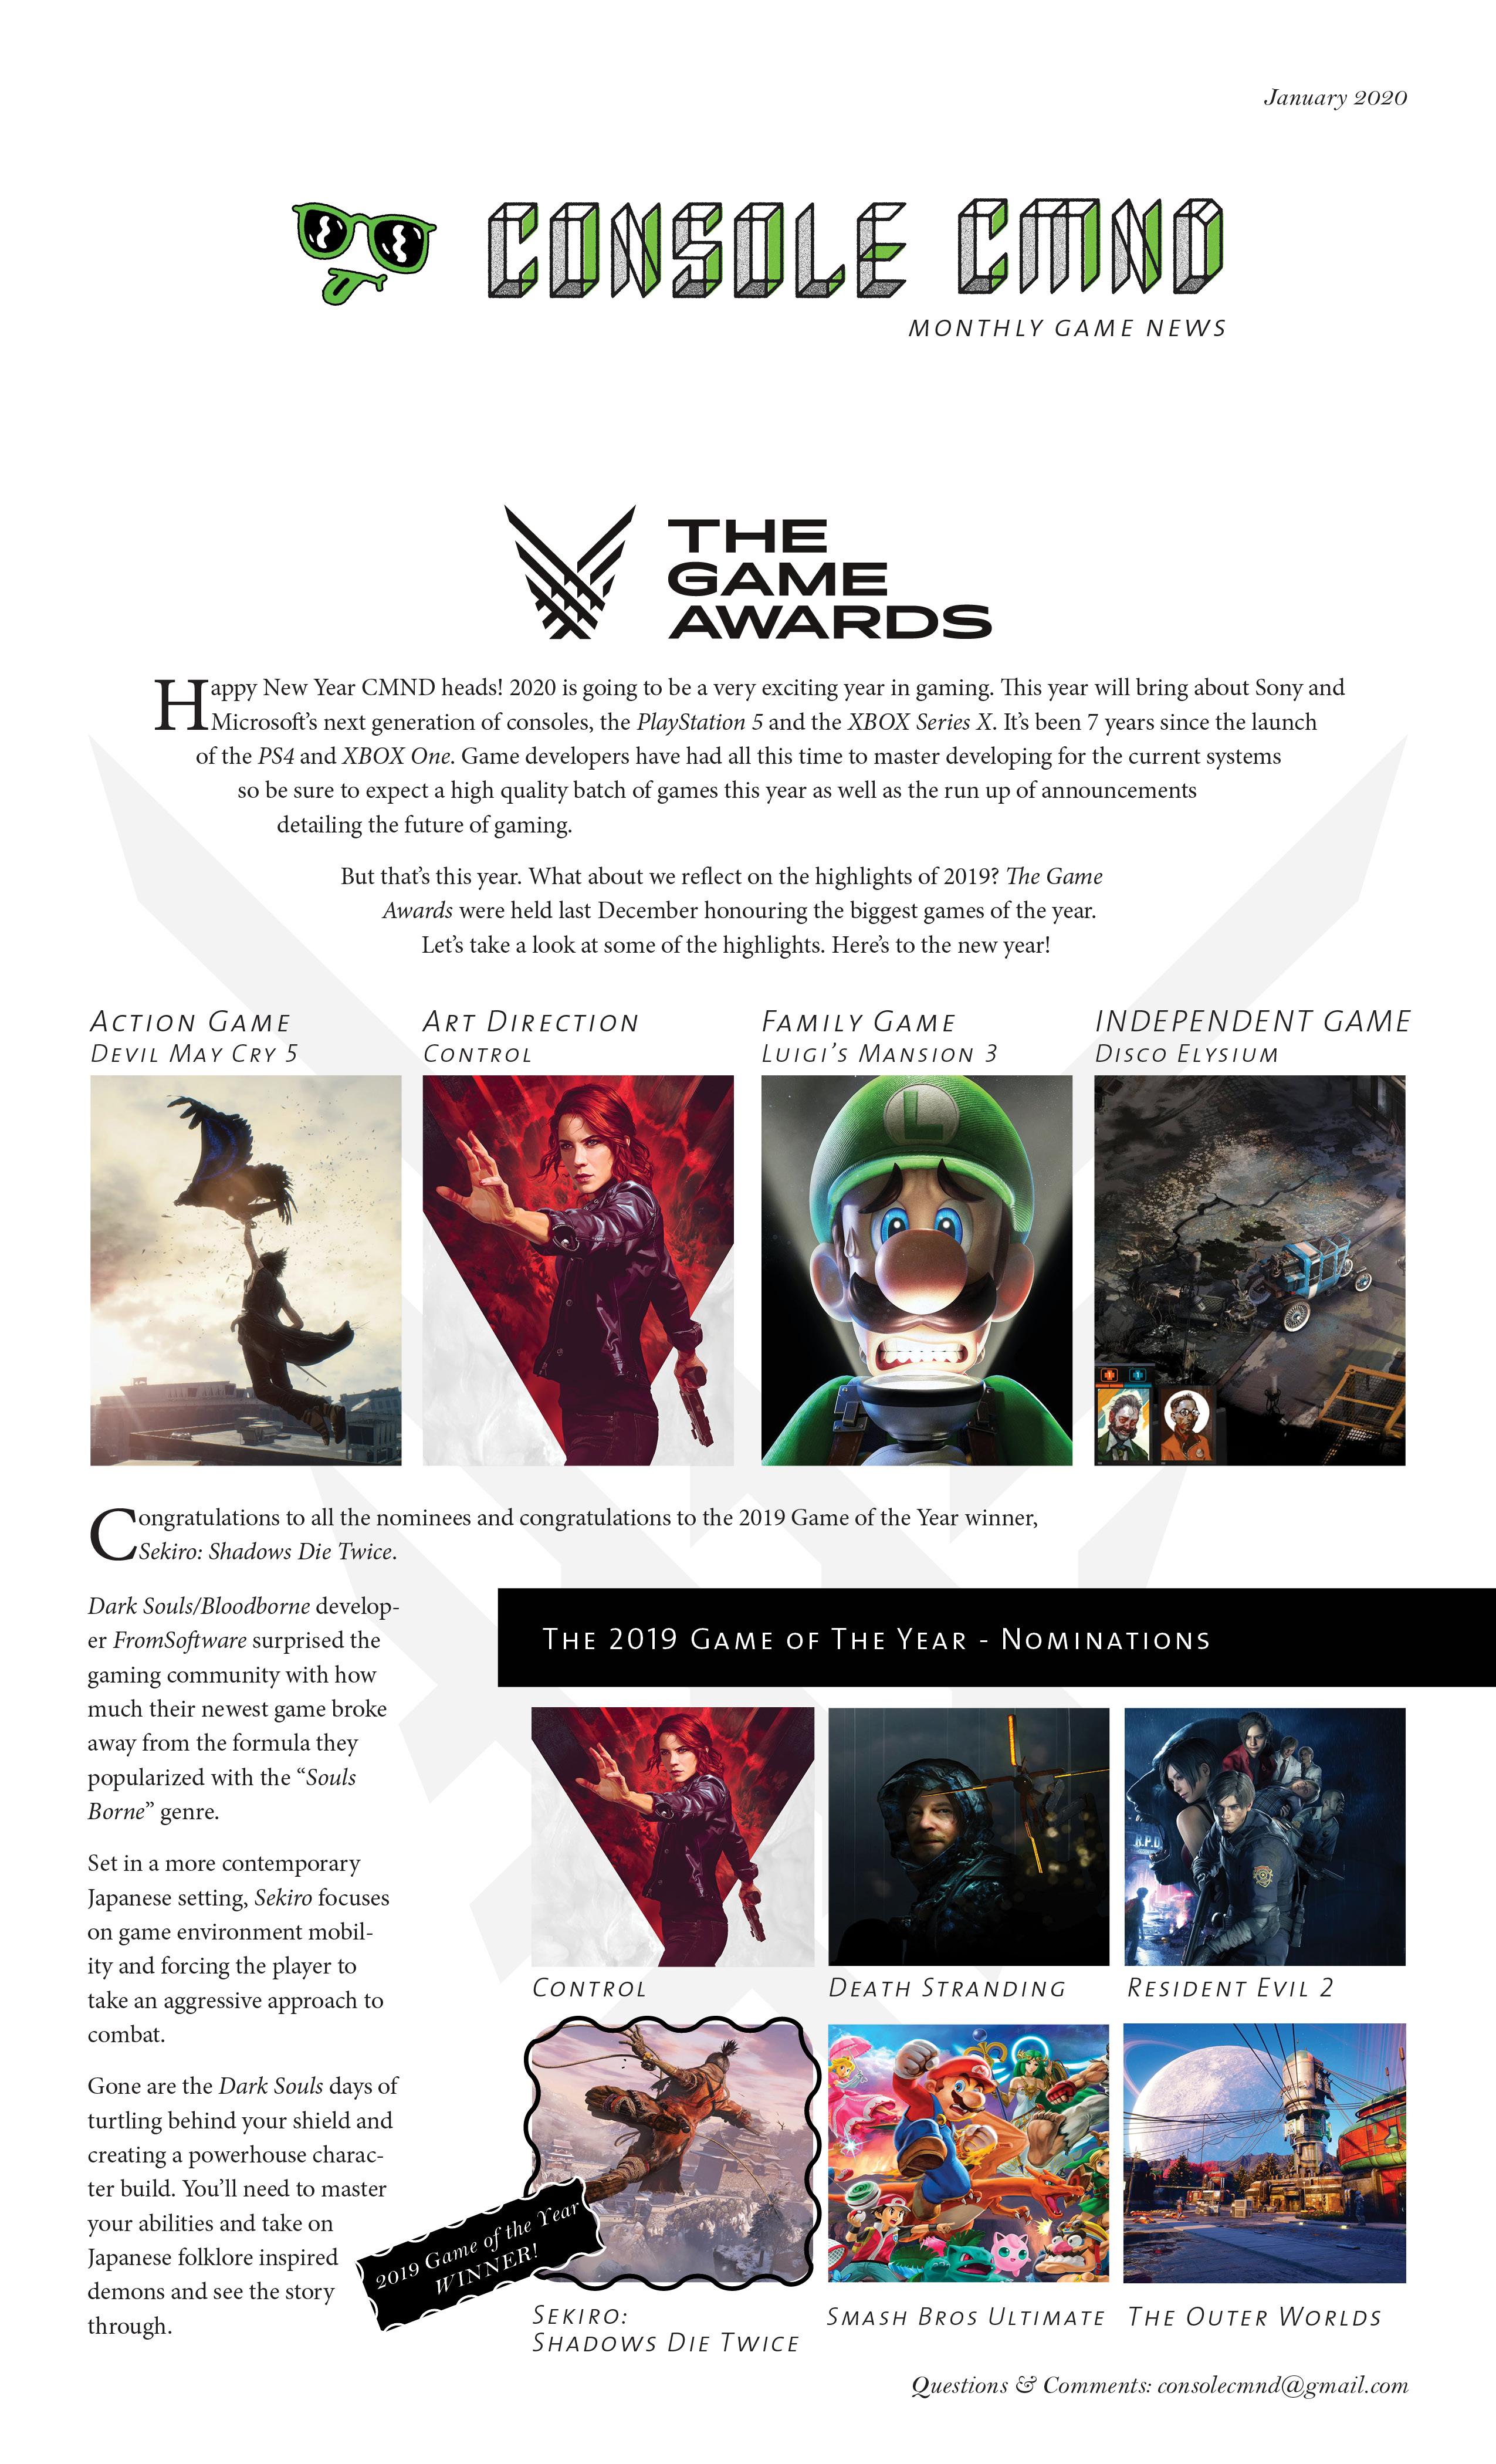 January 2020 - The Game Awards